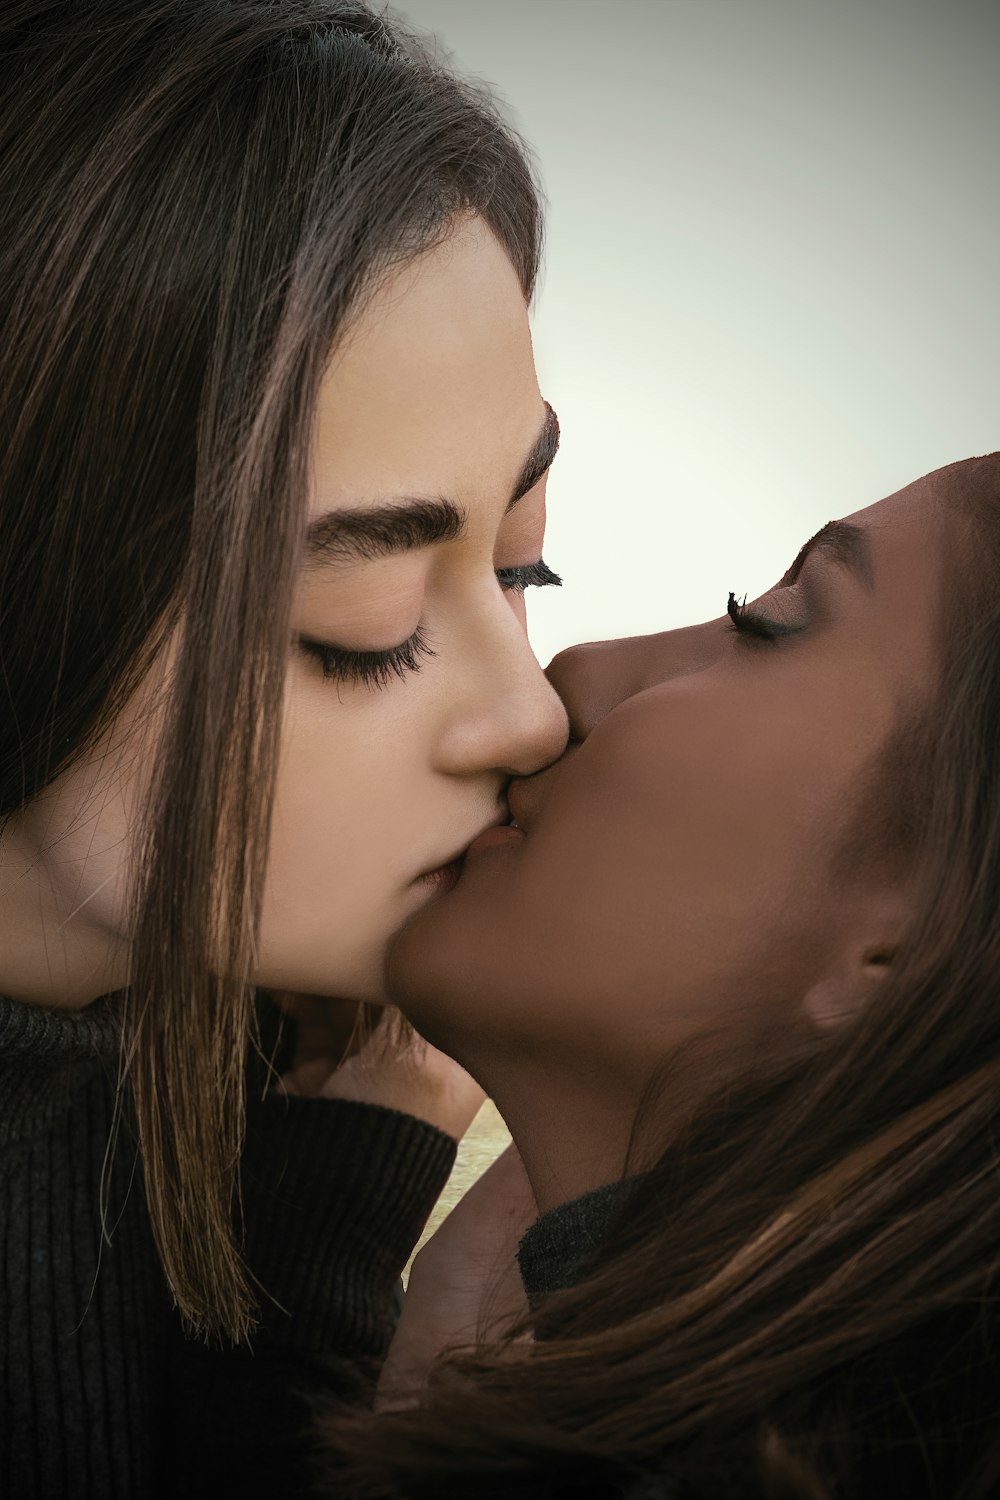 1500+ Girls Kissing Pictures | Download Free Images on Unsplash